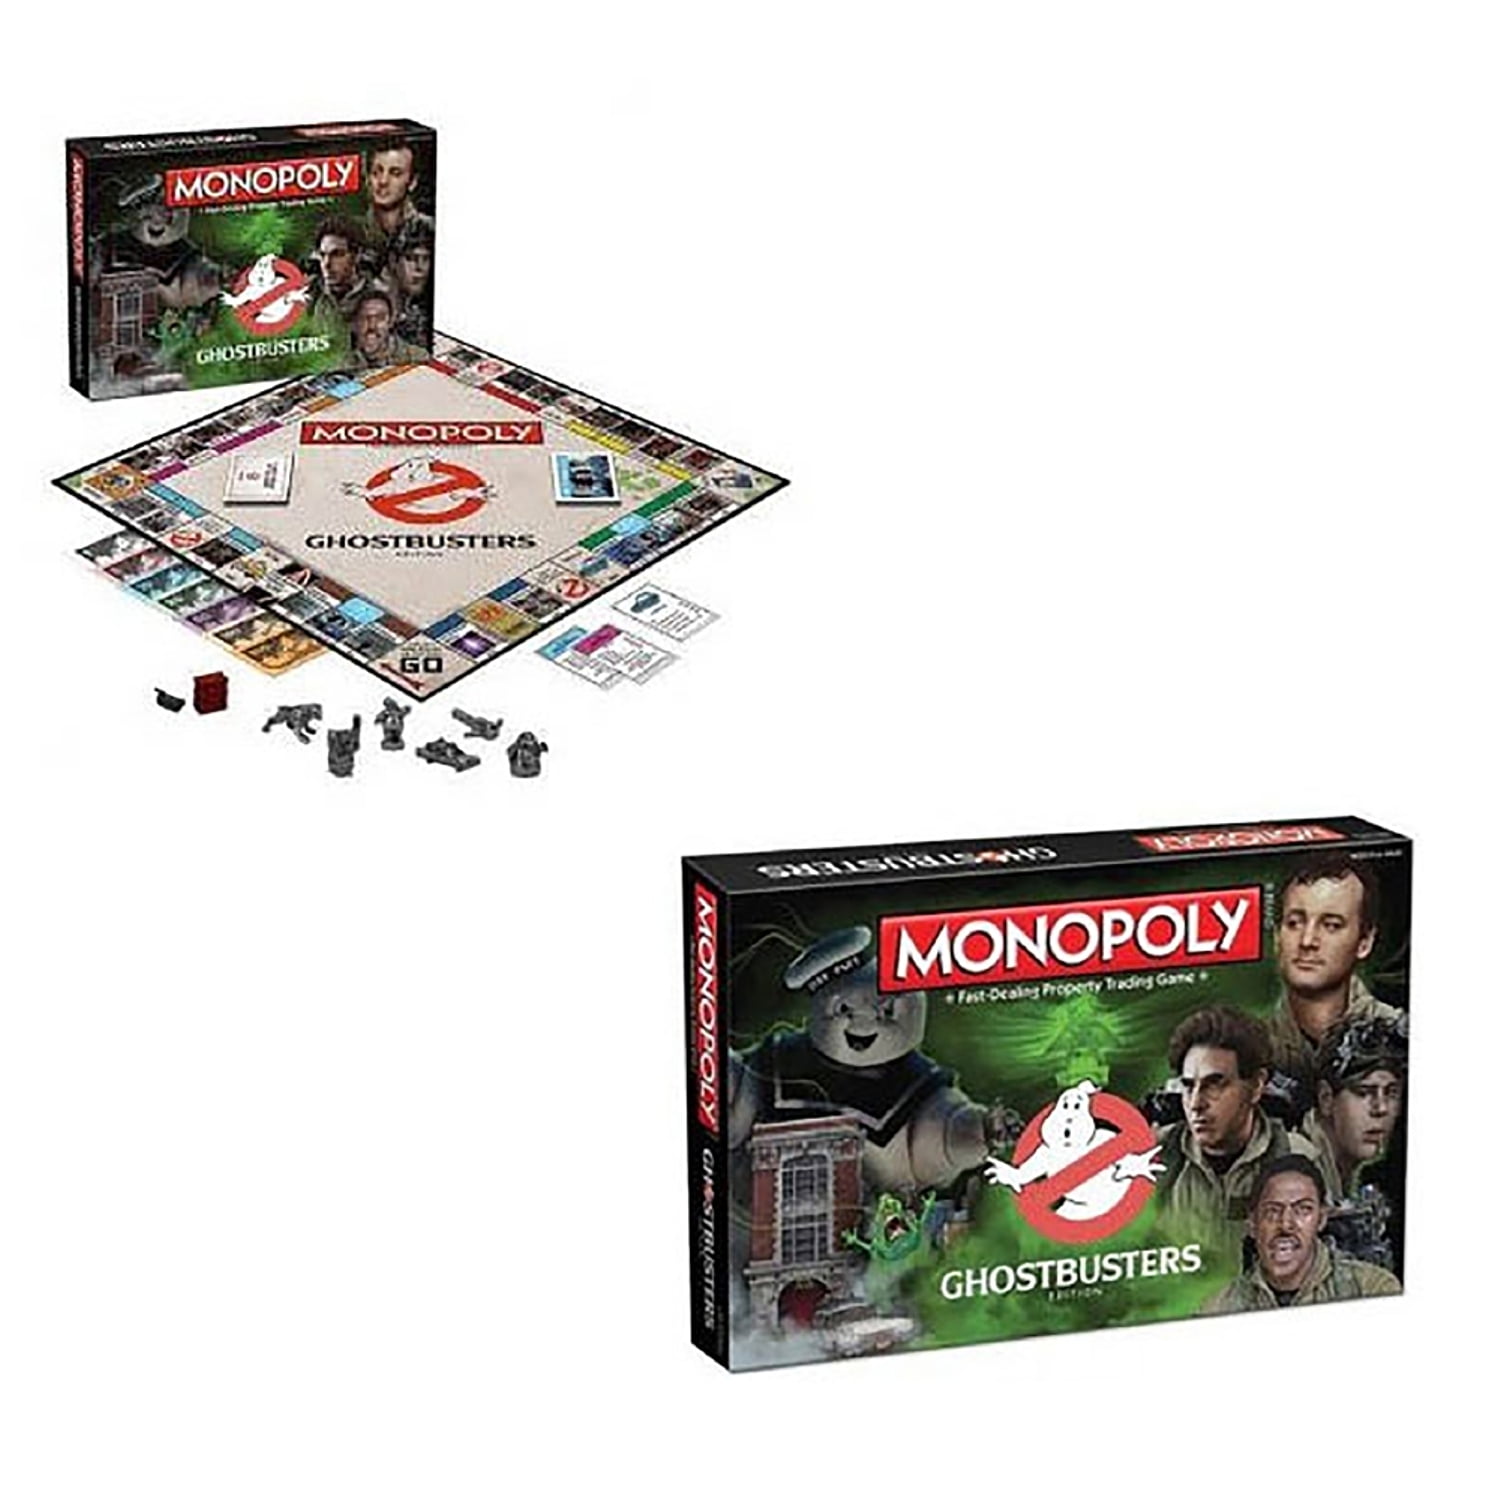 Monopoly Ghostbusters Board Game with Electronic Sound by Hasbro 2020 